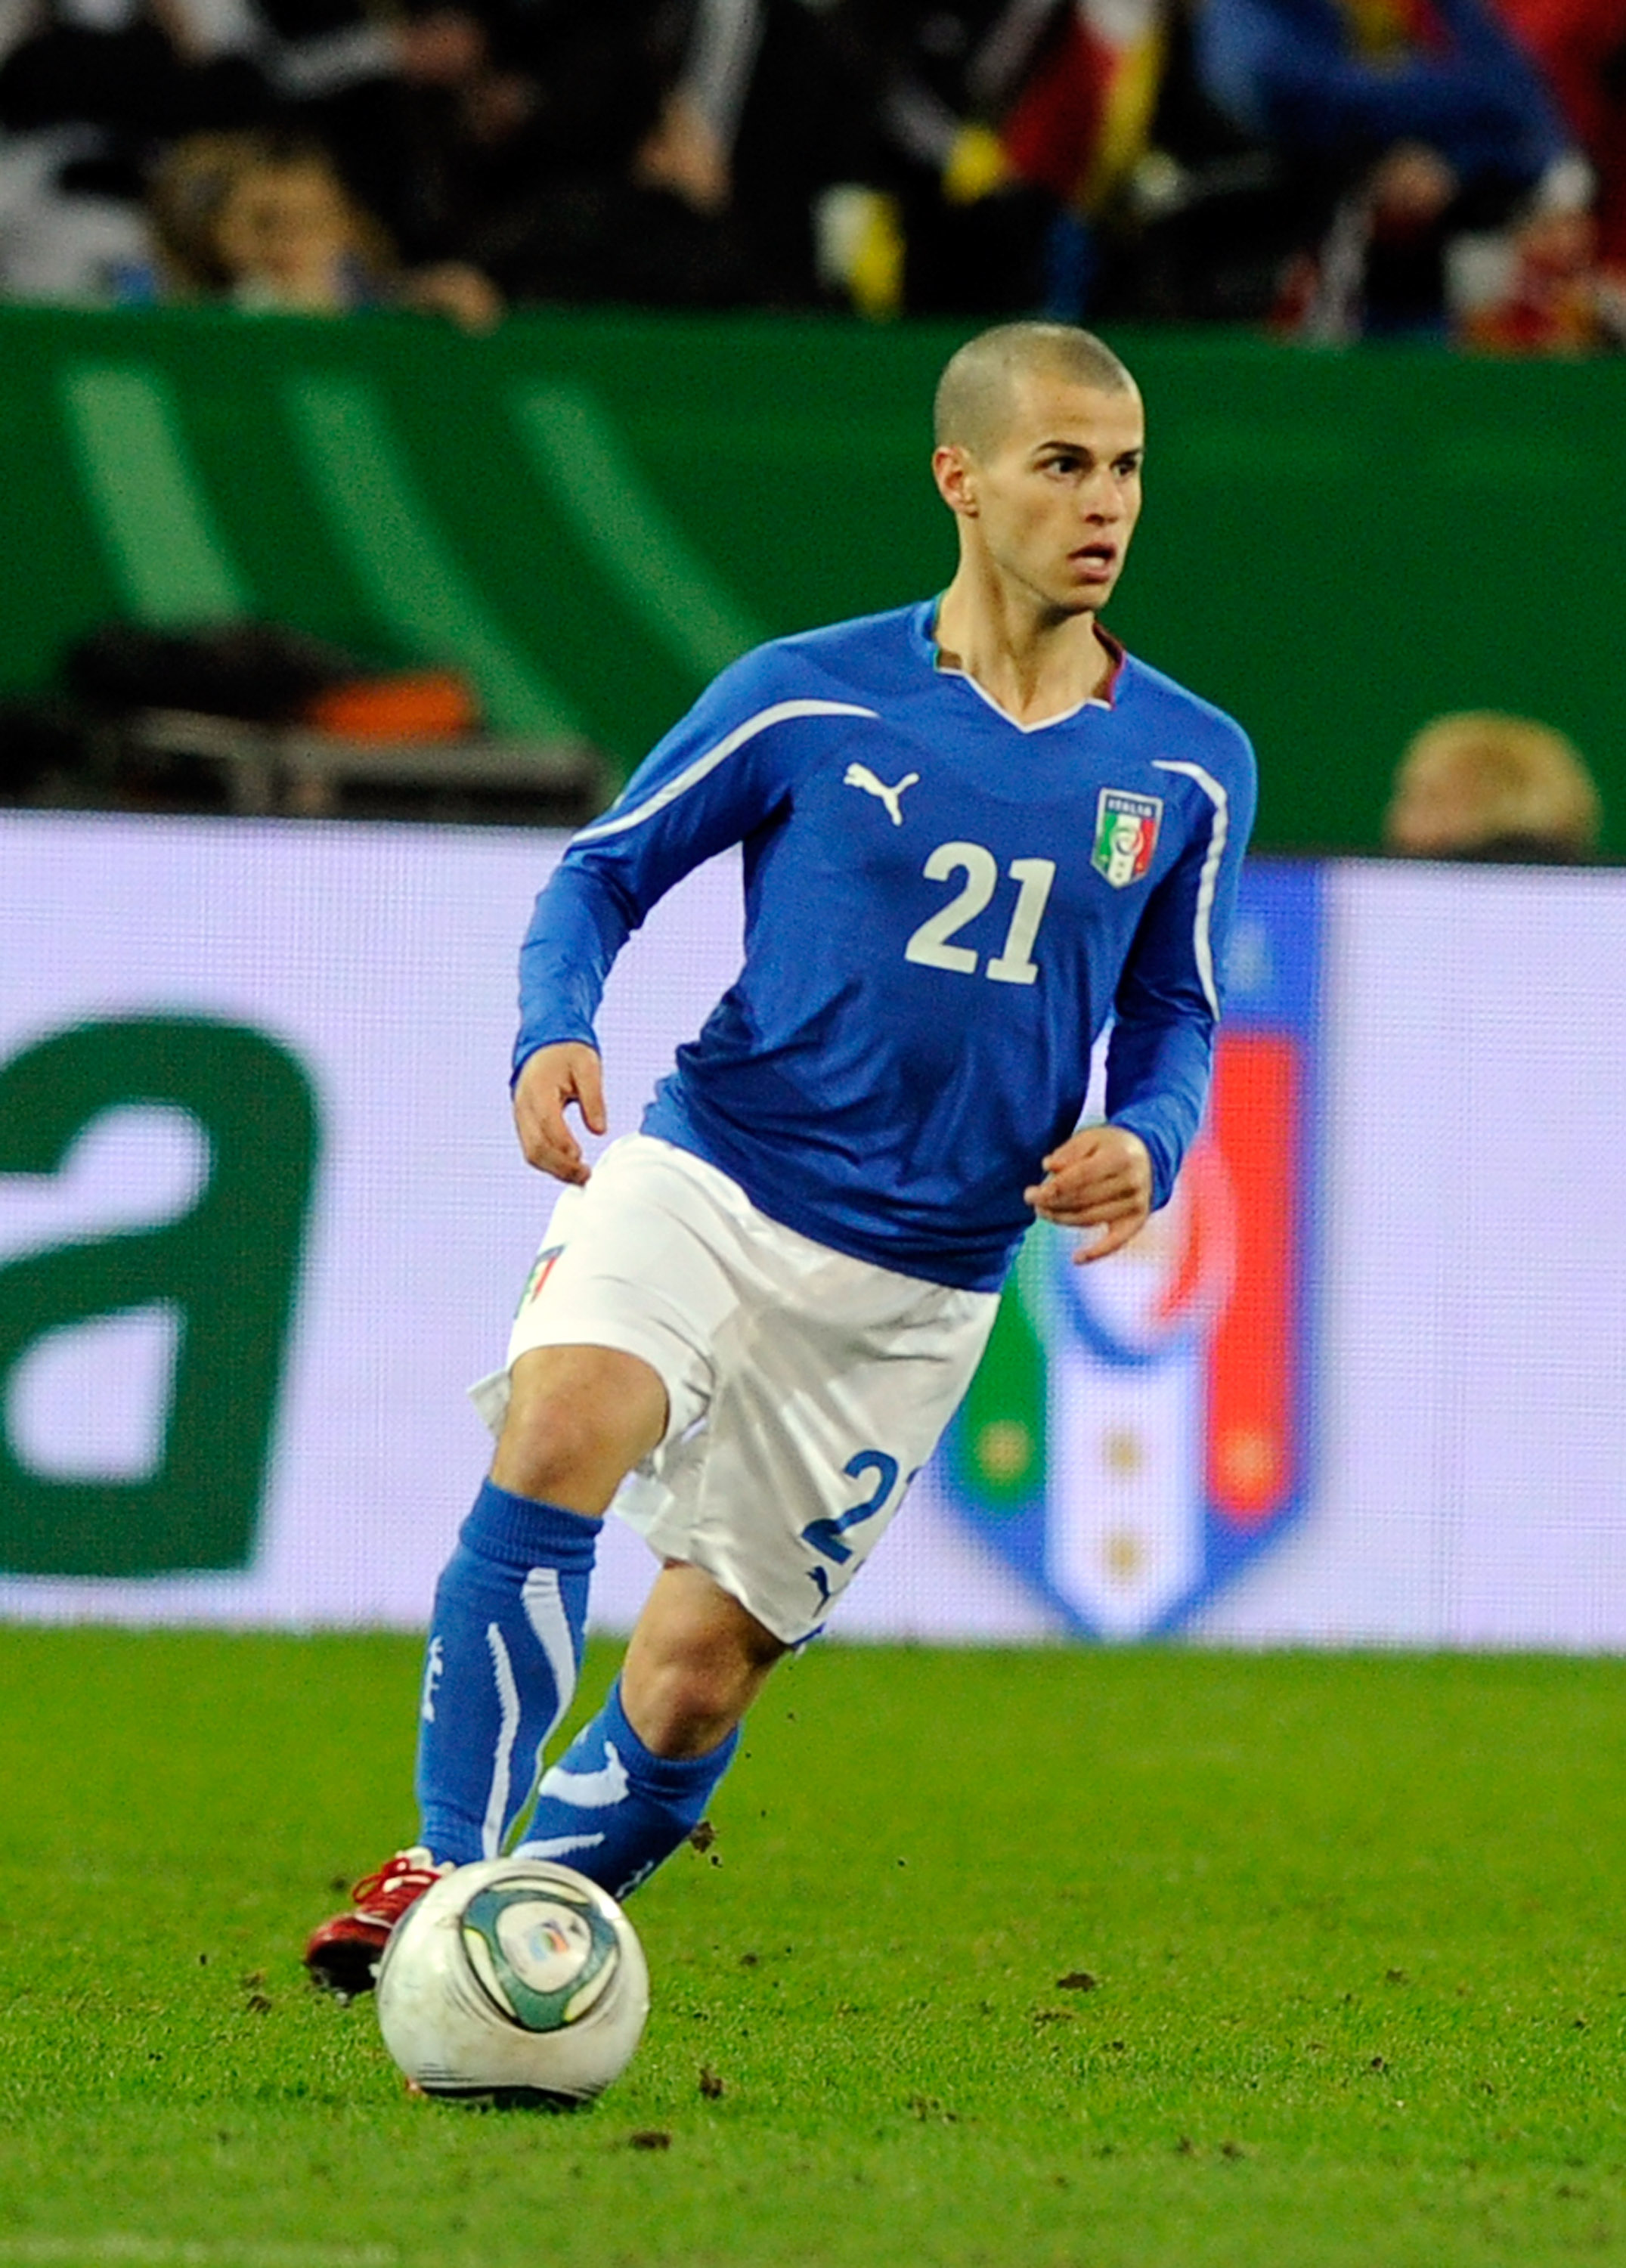 DORTMUND, GERMANY - FEBRUARY 09:  Sebastian Giovinco of Italy runs with the ball during the International Friendly match between Germany and Italy on February 9, 2011 in Dortmund, Germany.  (Photo by Claudio Villa/Getty Images)